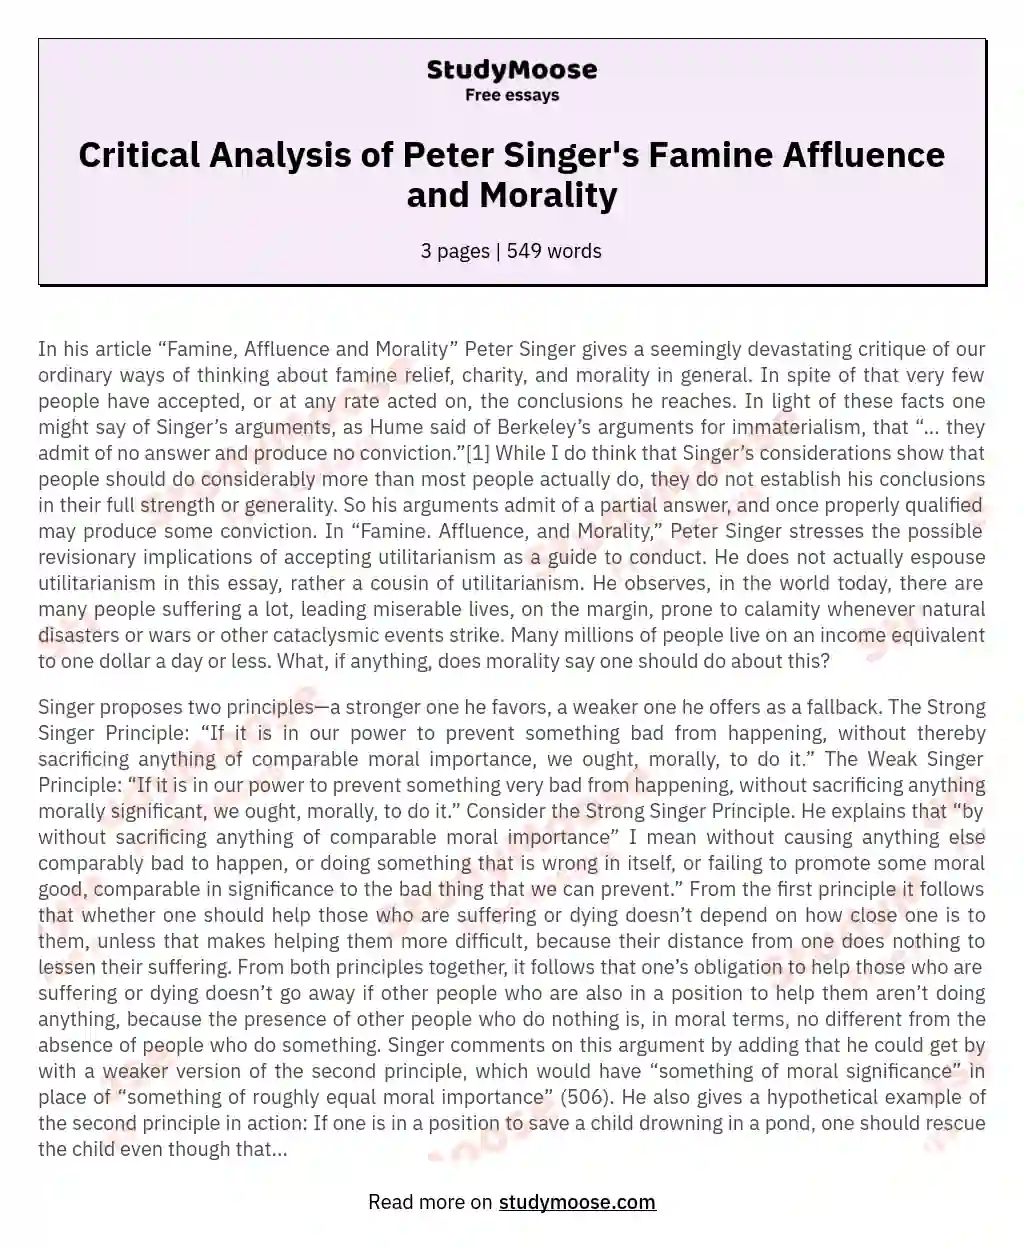 Critical Analysis of Peter Singer's Famine Affluence and Morality essay